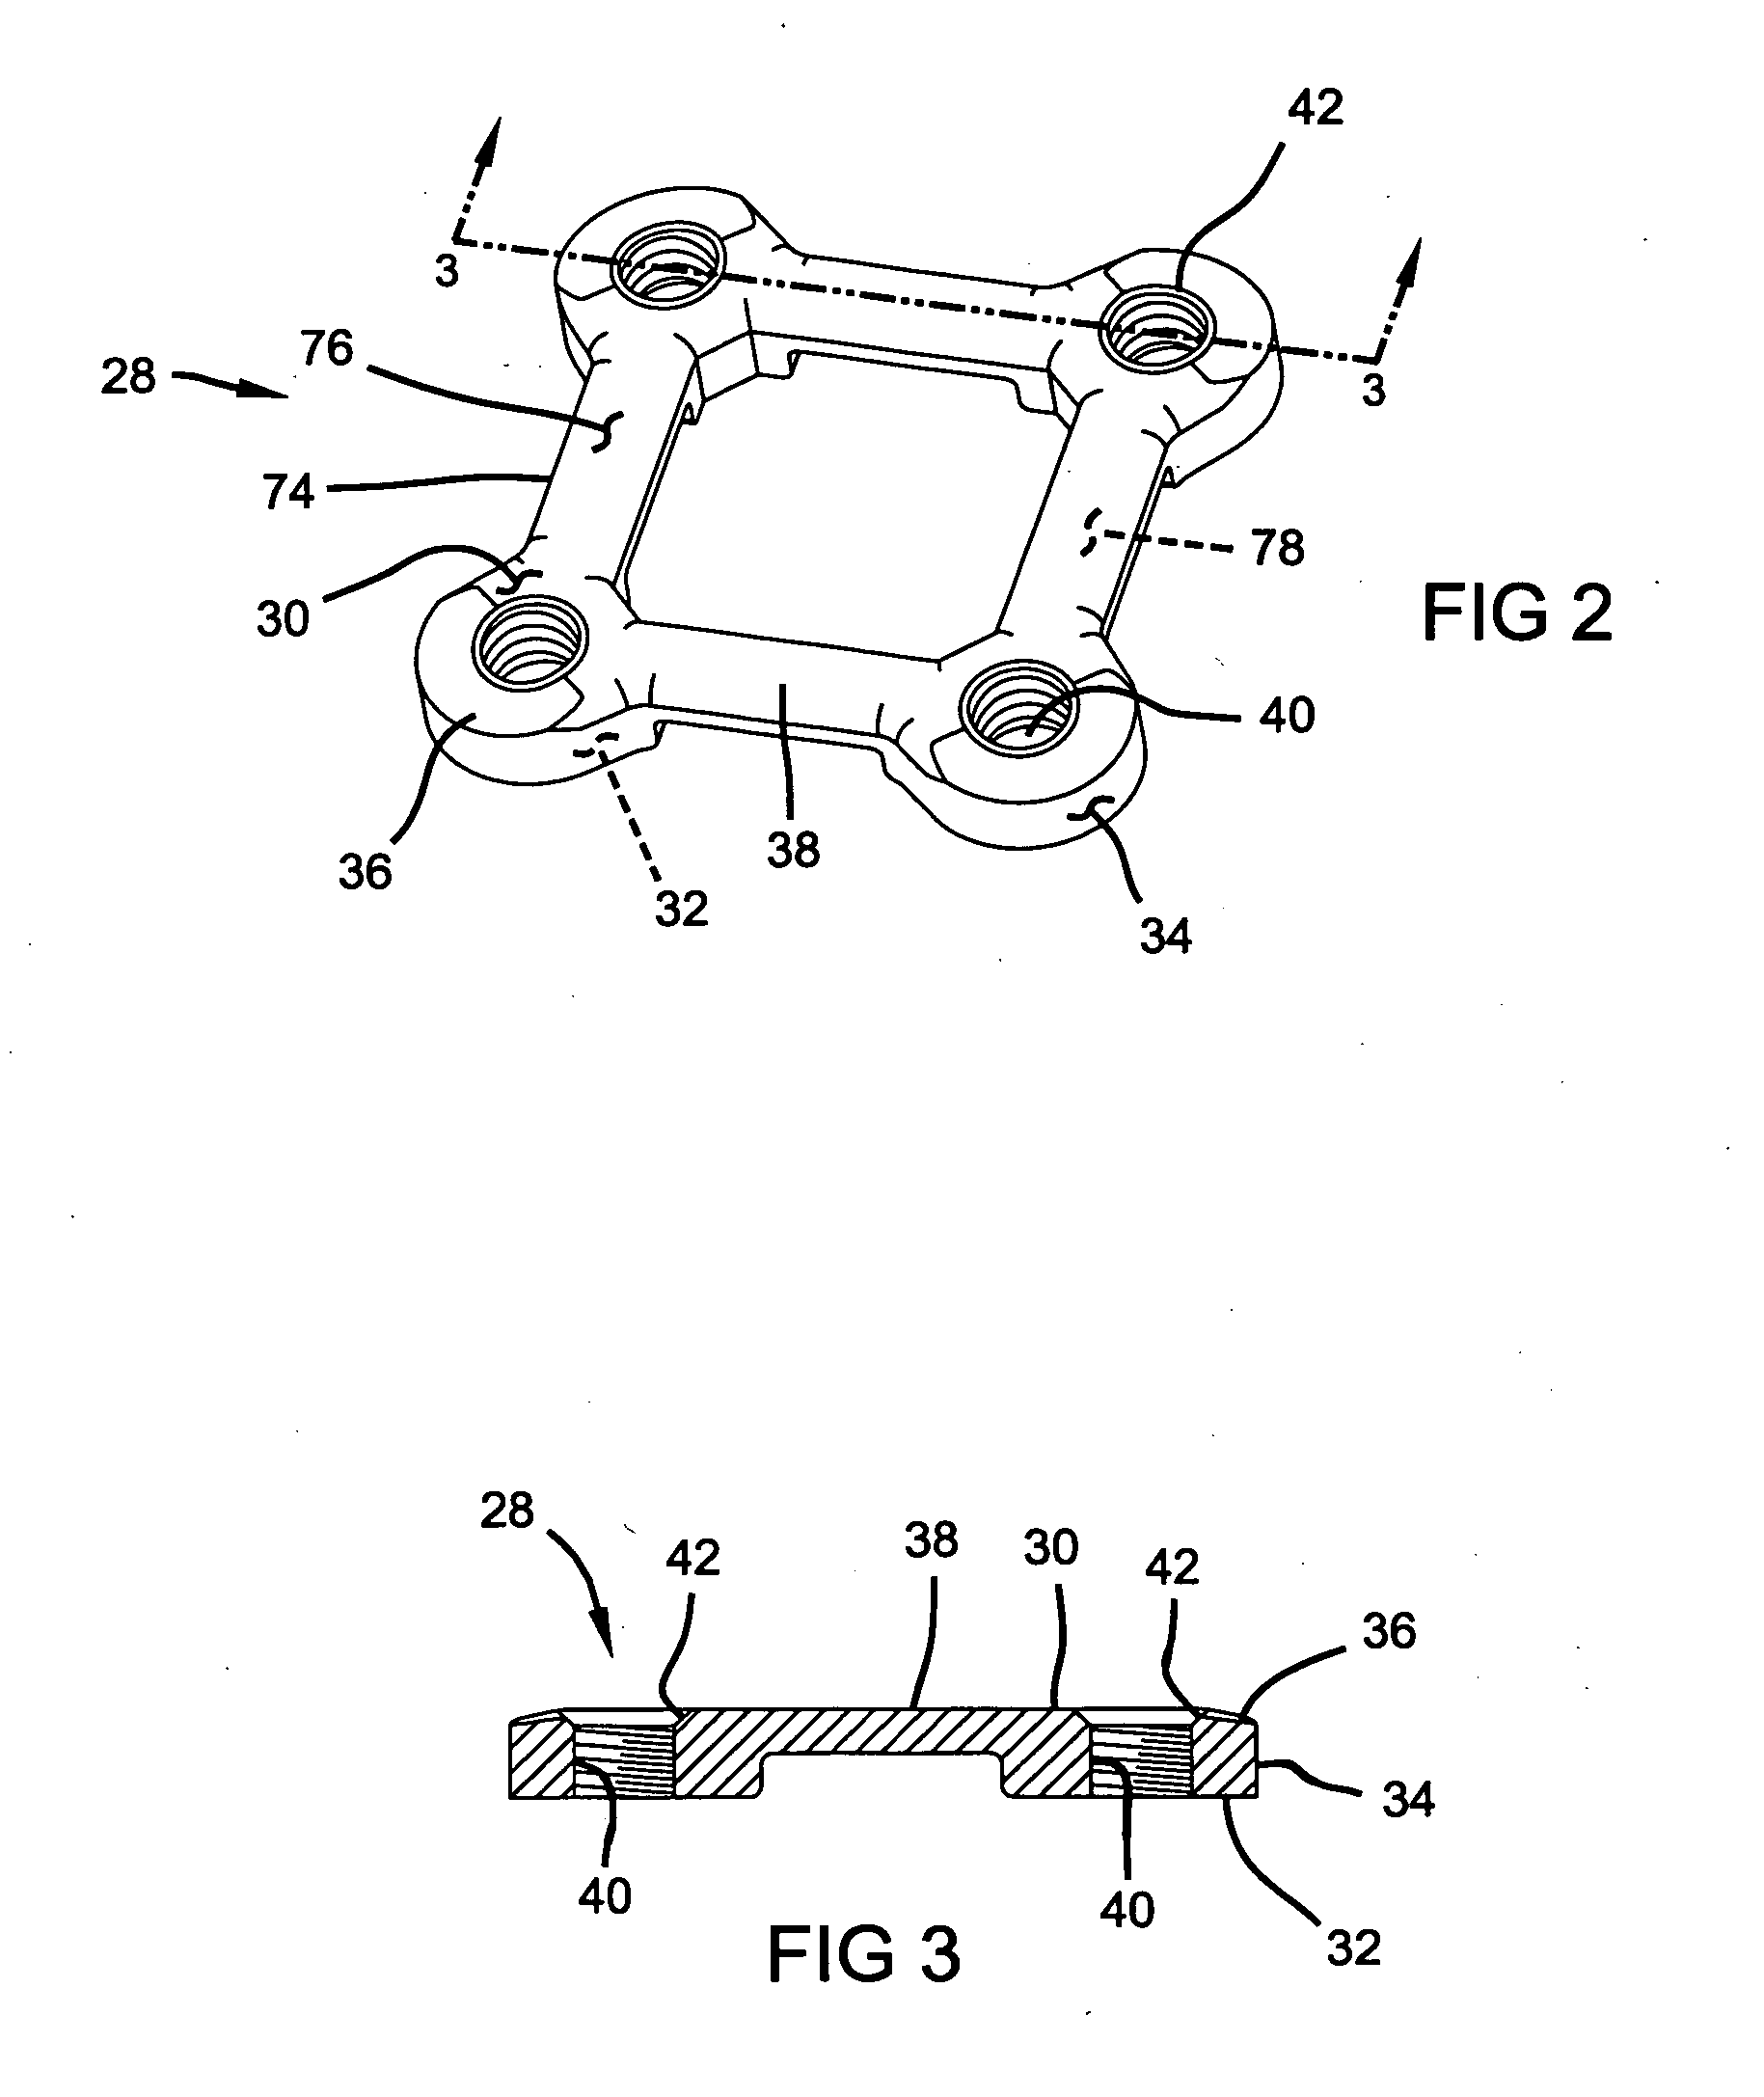 Method and apparatus for bone fracture fixation